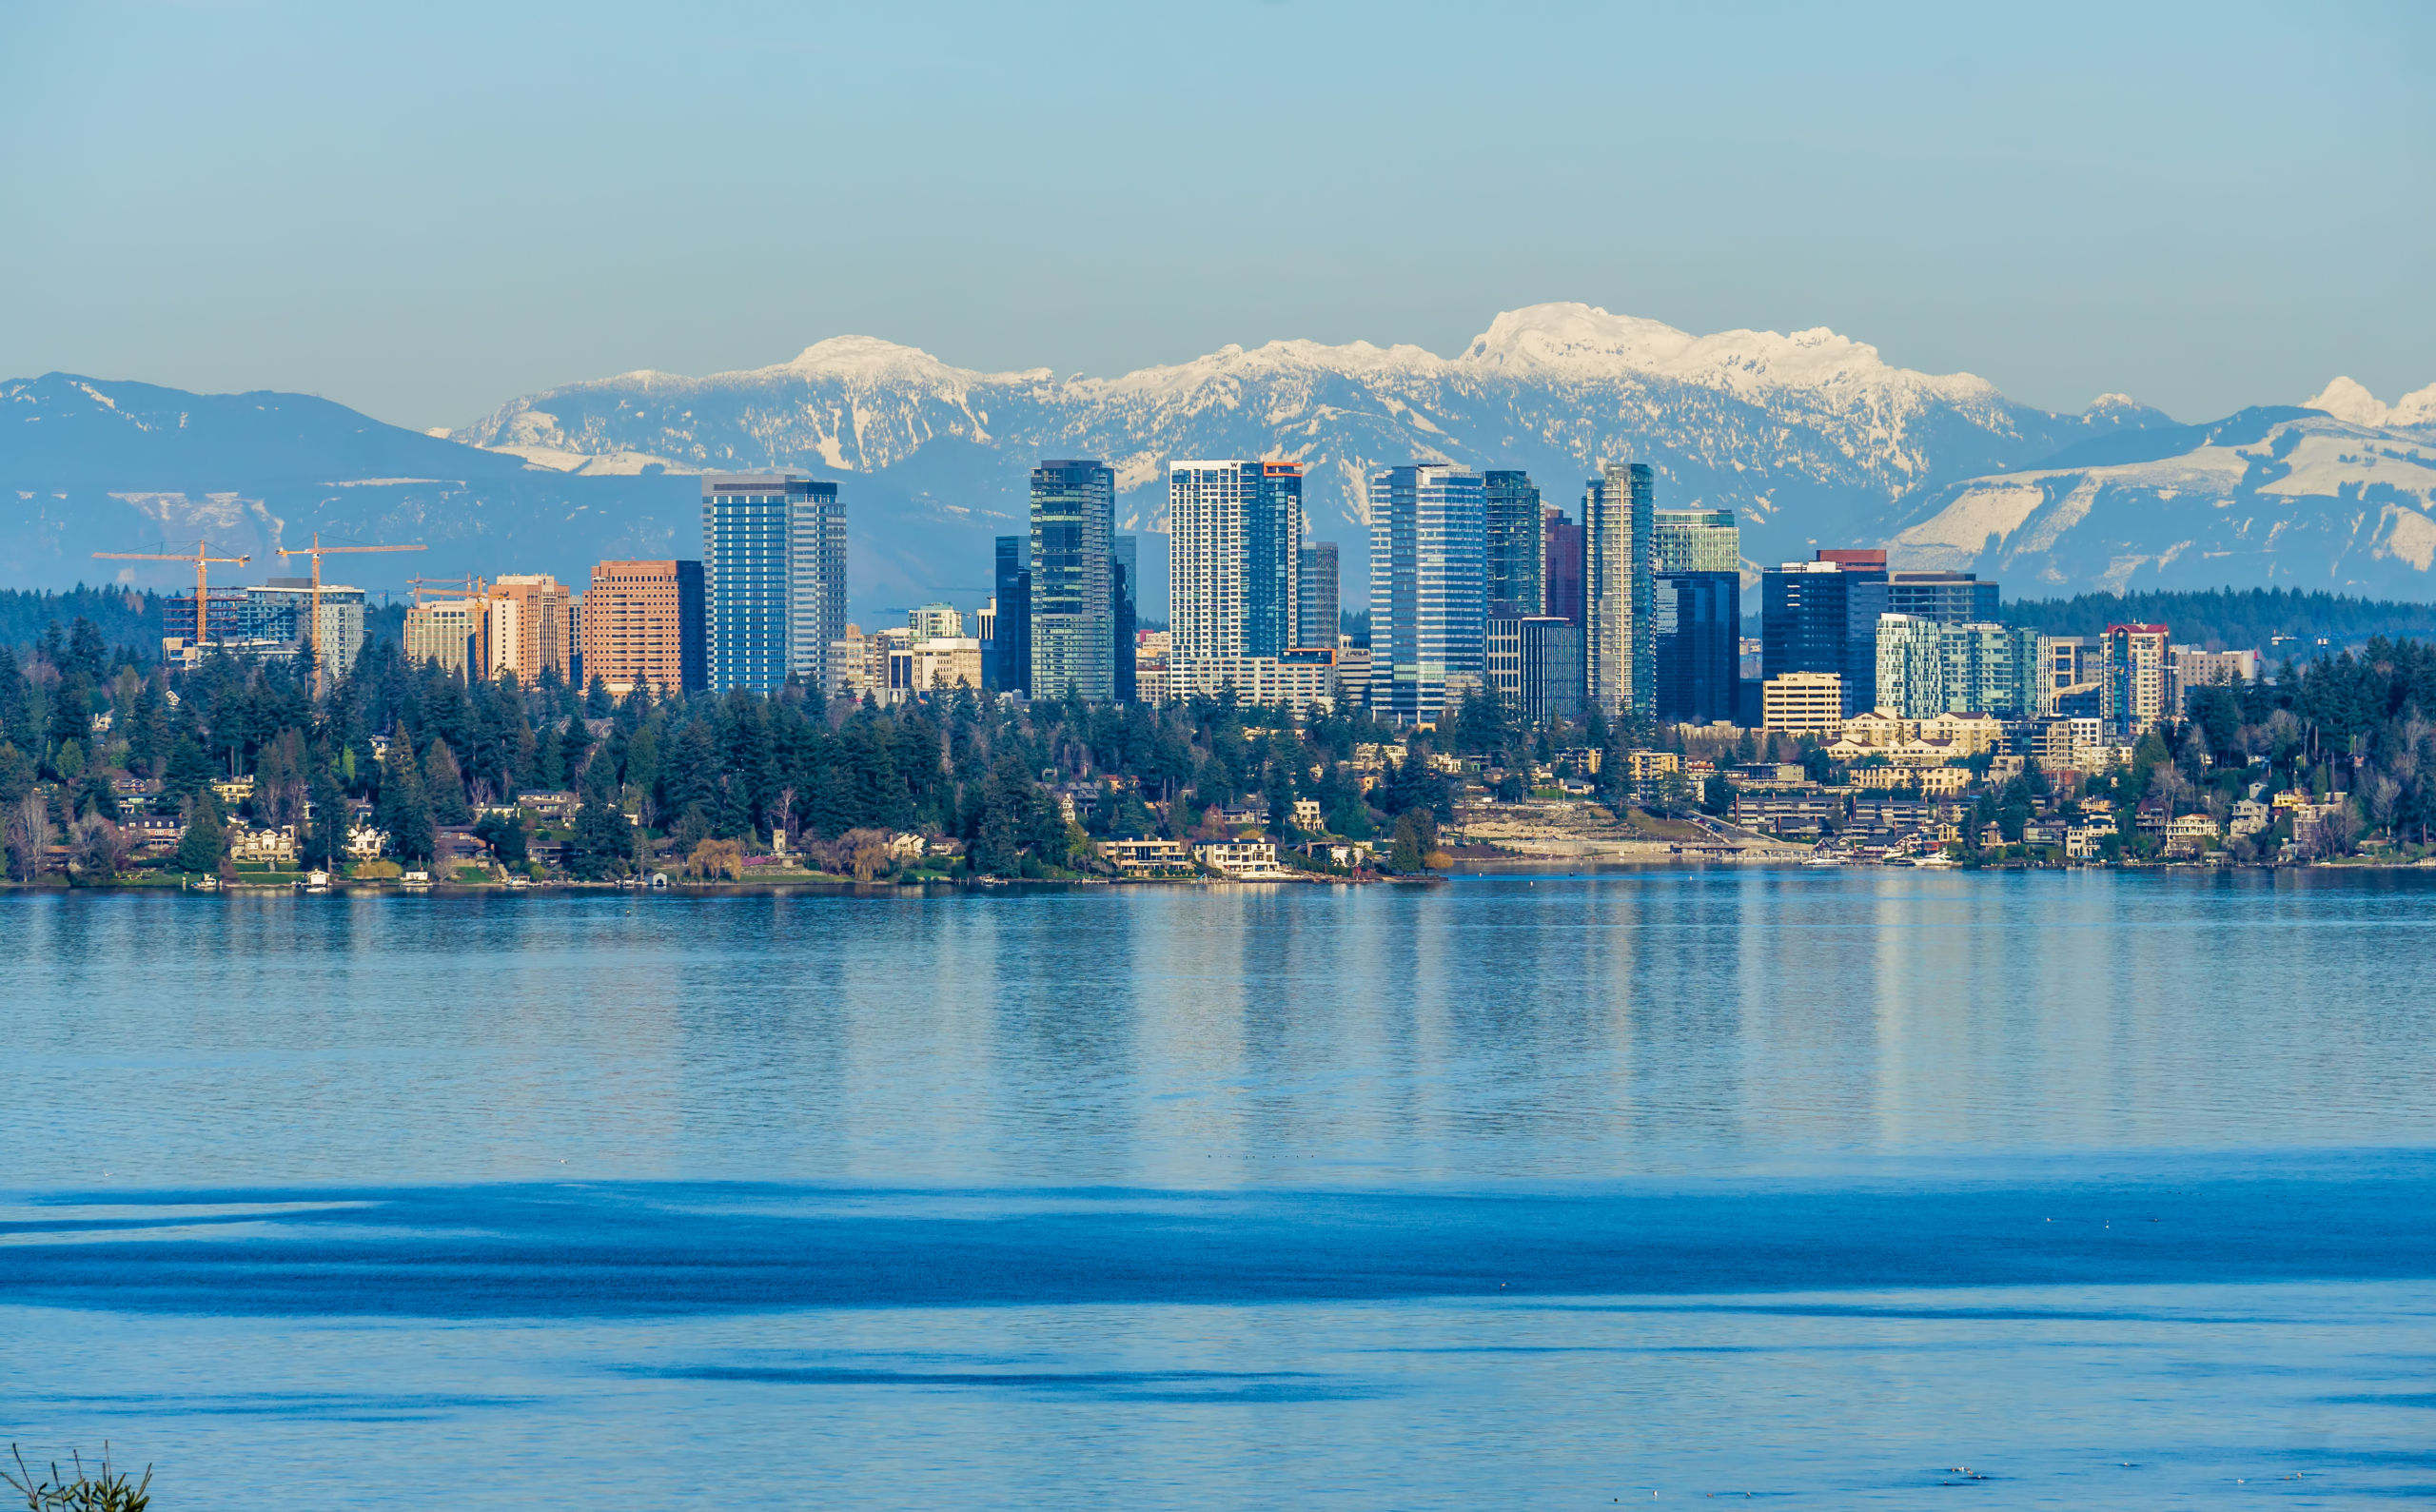 Bellevue in the winter with snowy mountains. 